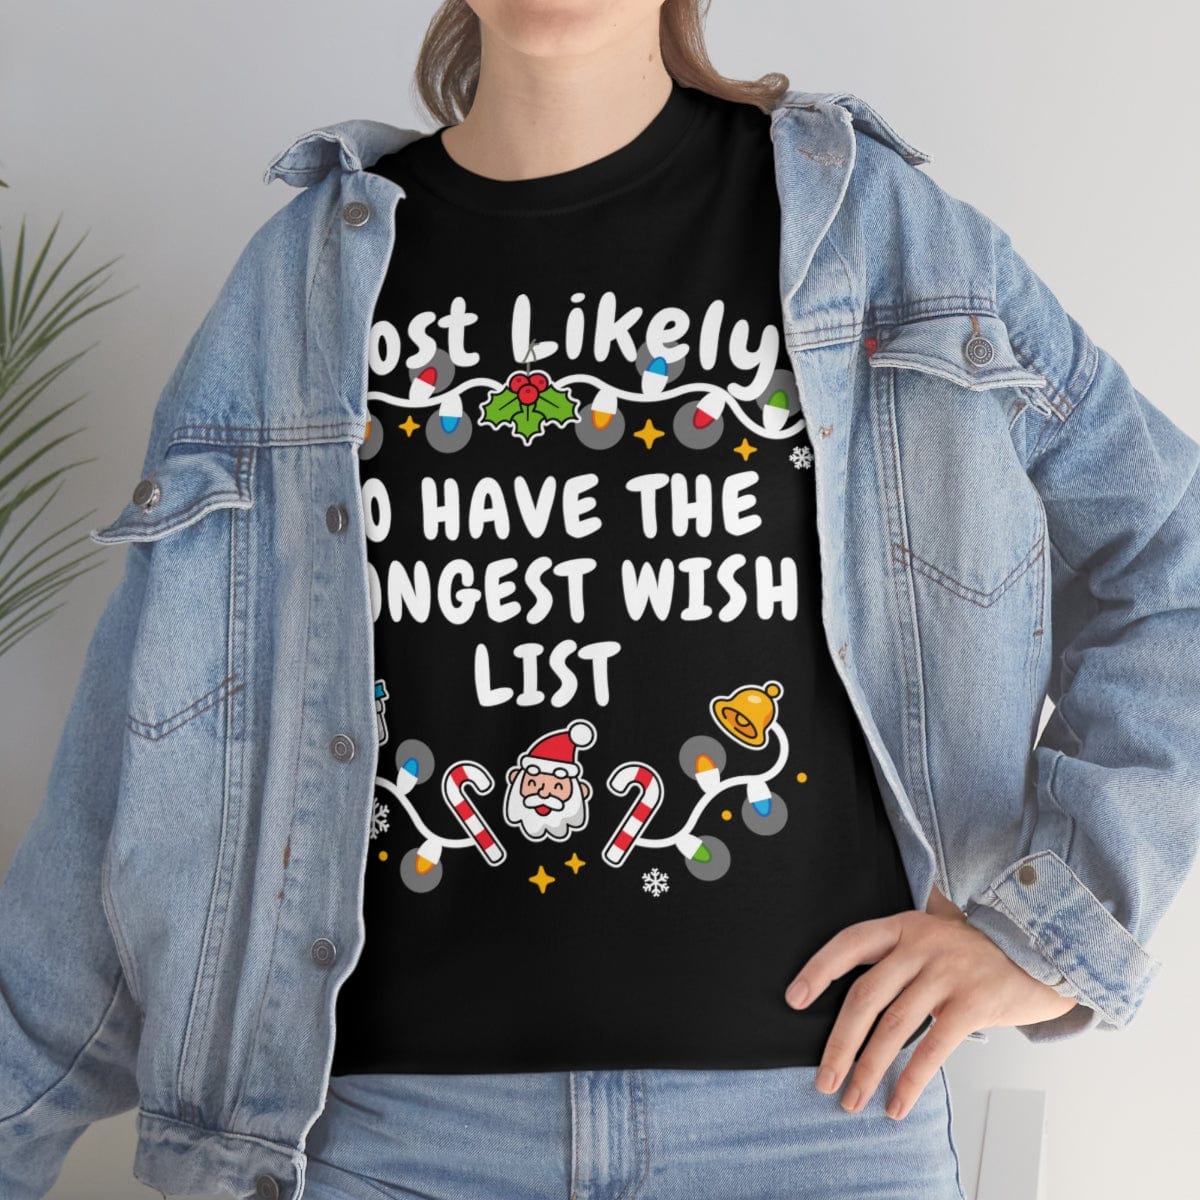 TO HAVE THE LONGEST WISH LIST